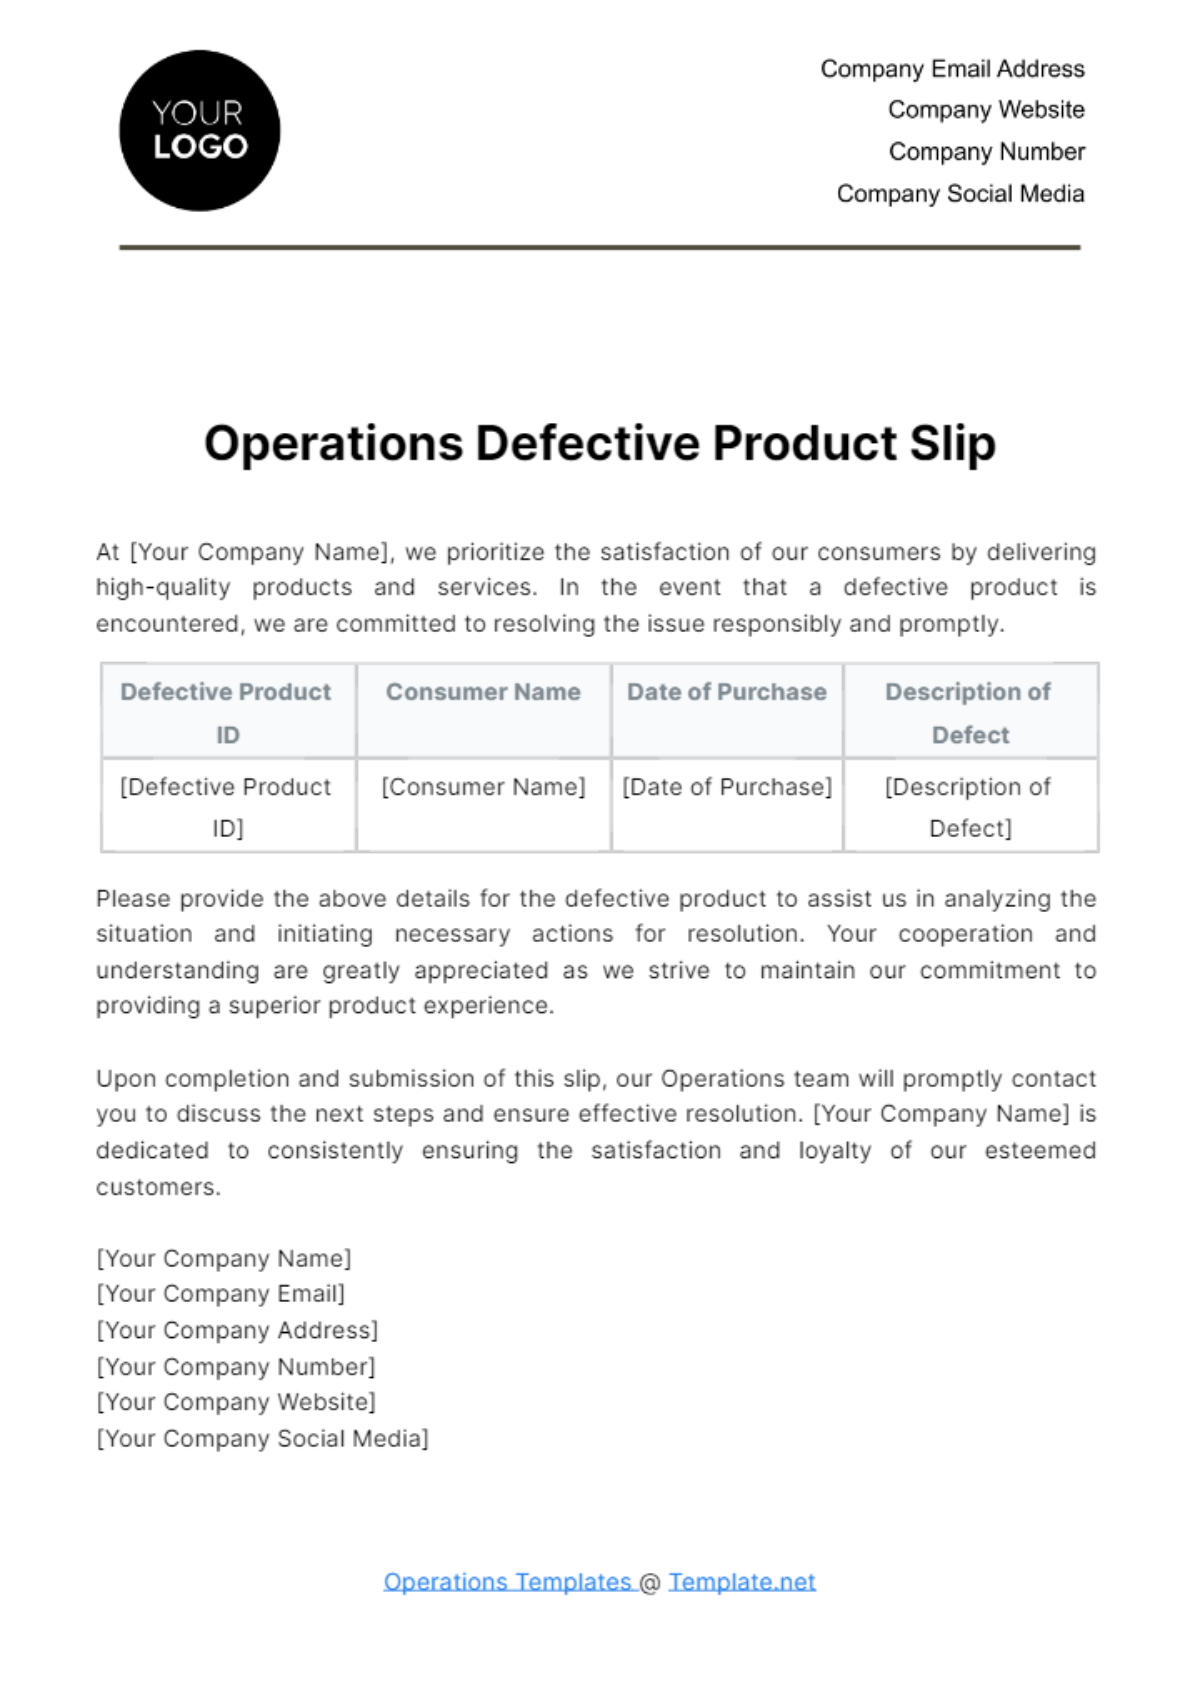 Free Operations Defective Product Slip Template